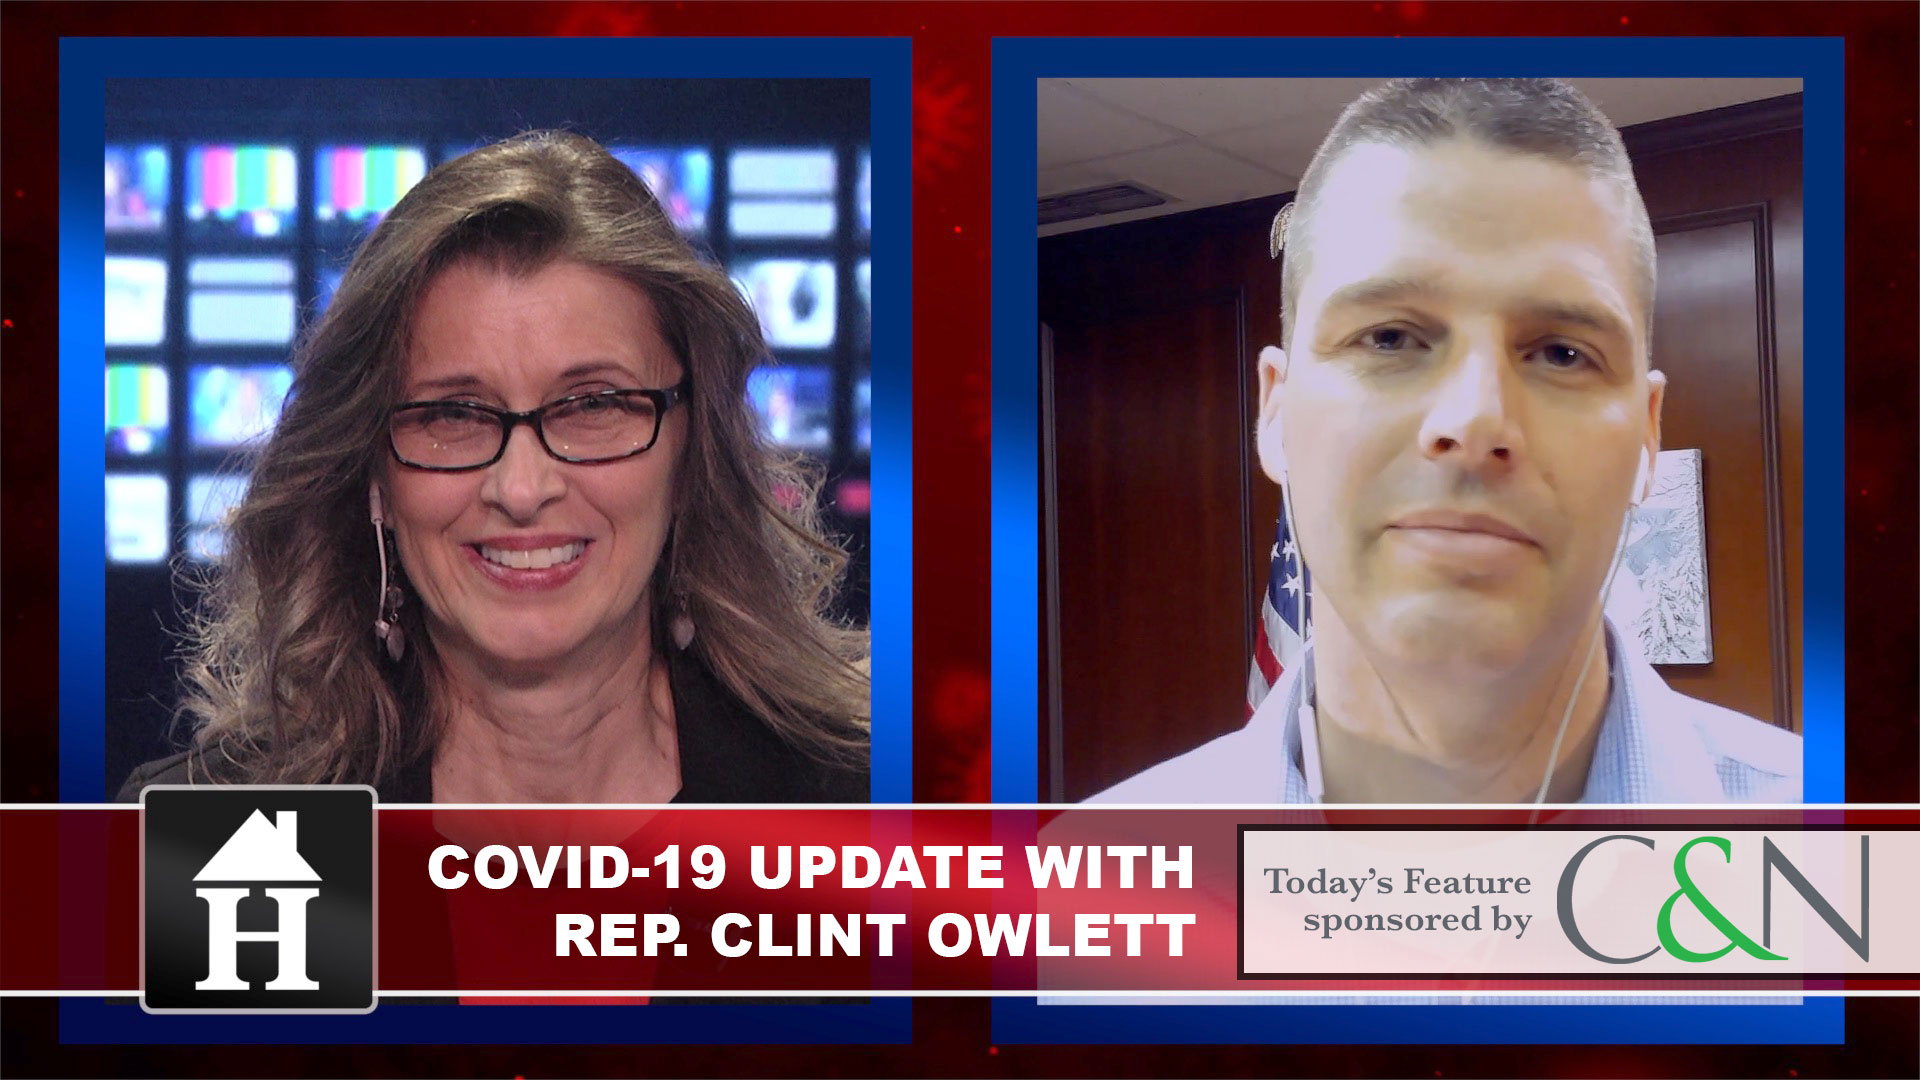 COVID-19 Update with Rep. Clint Owlett